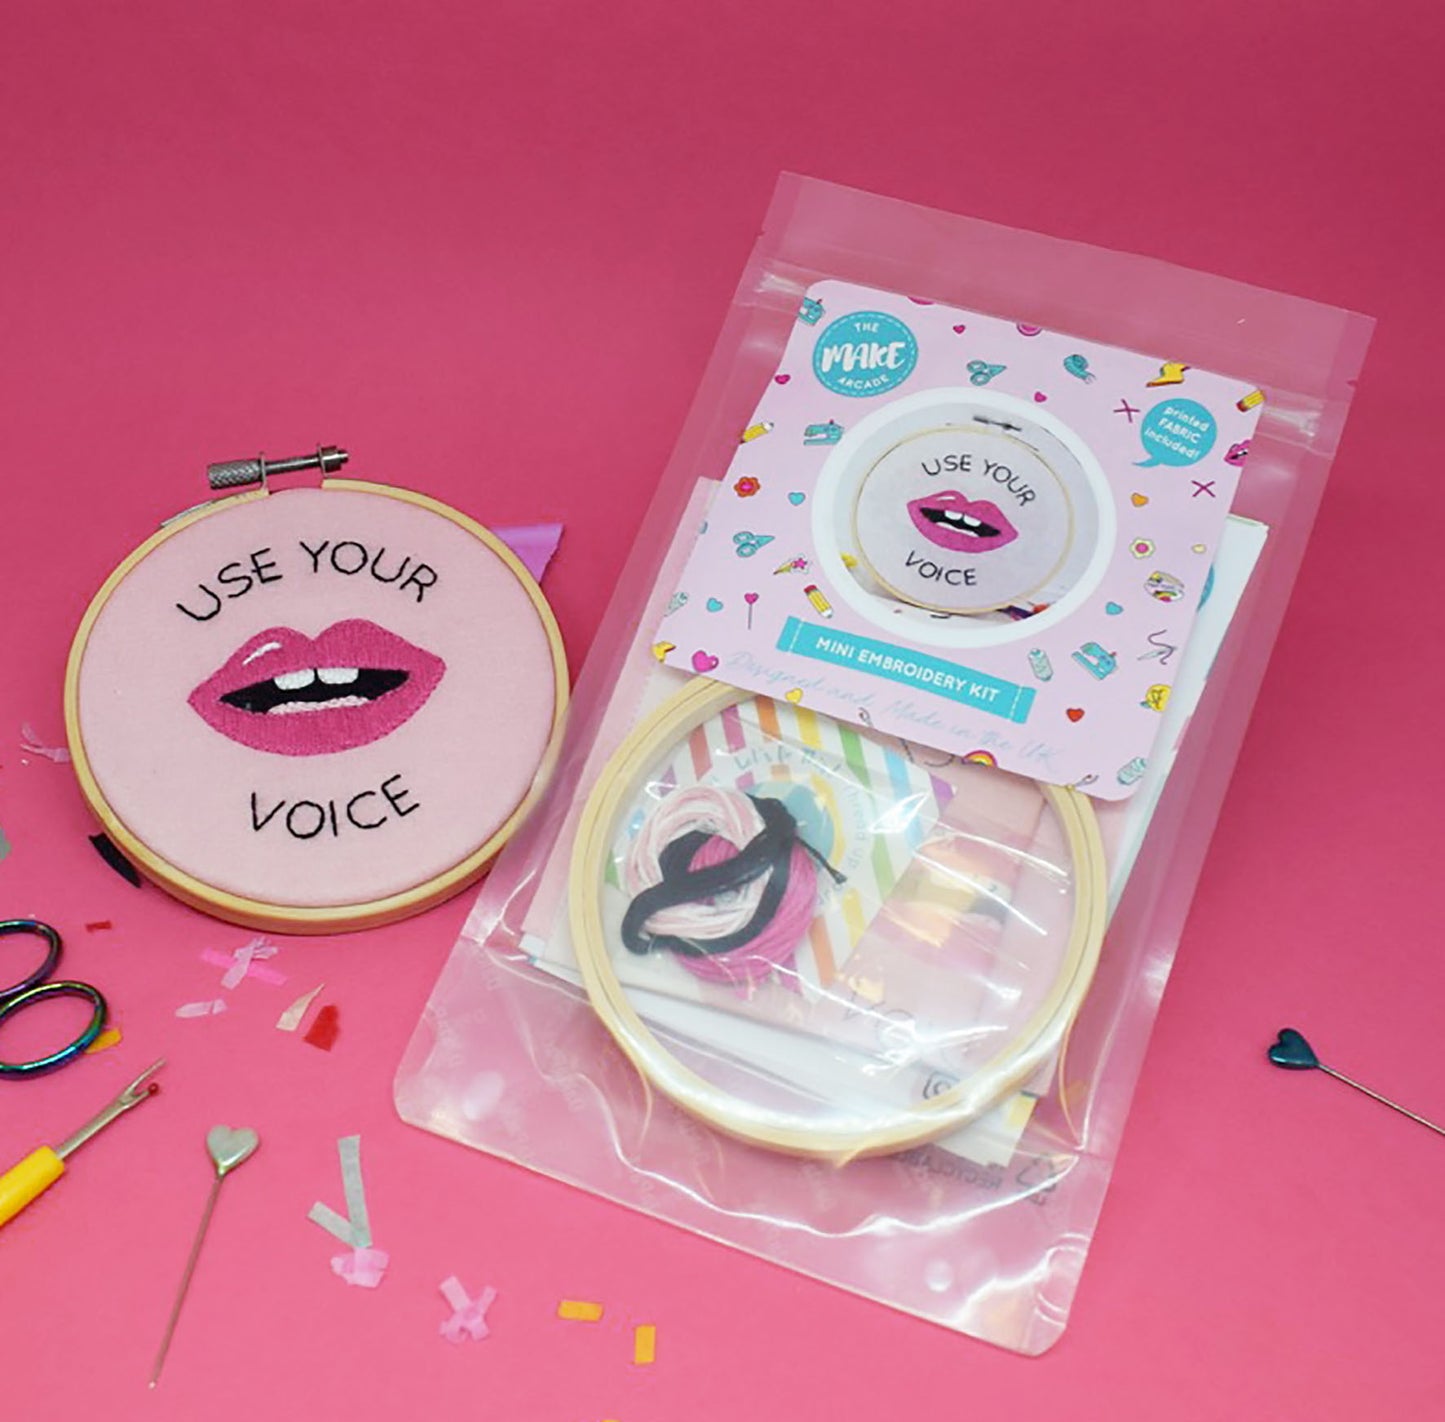 'Use your Voice' Mini Embroidery Kit